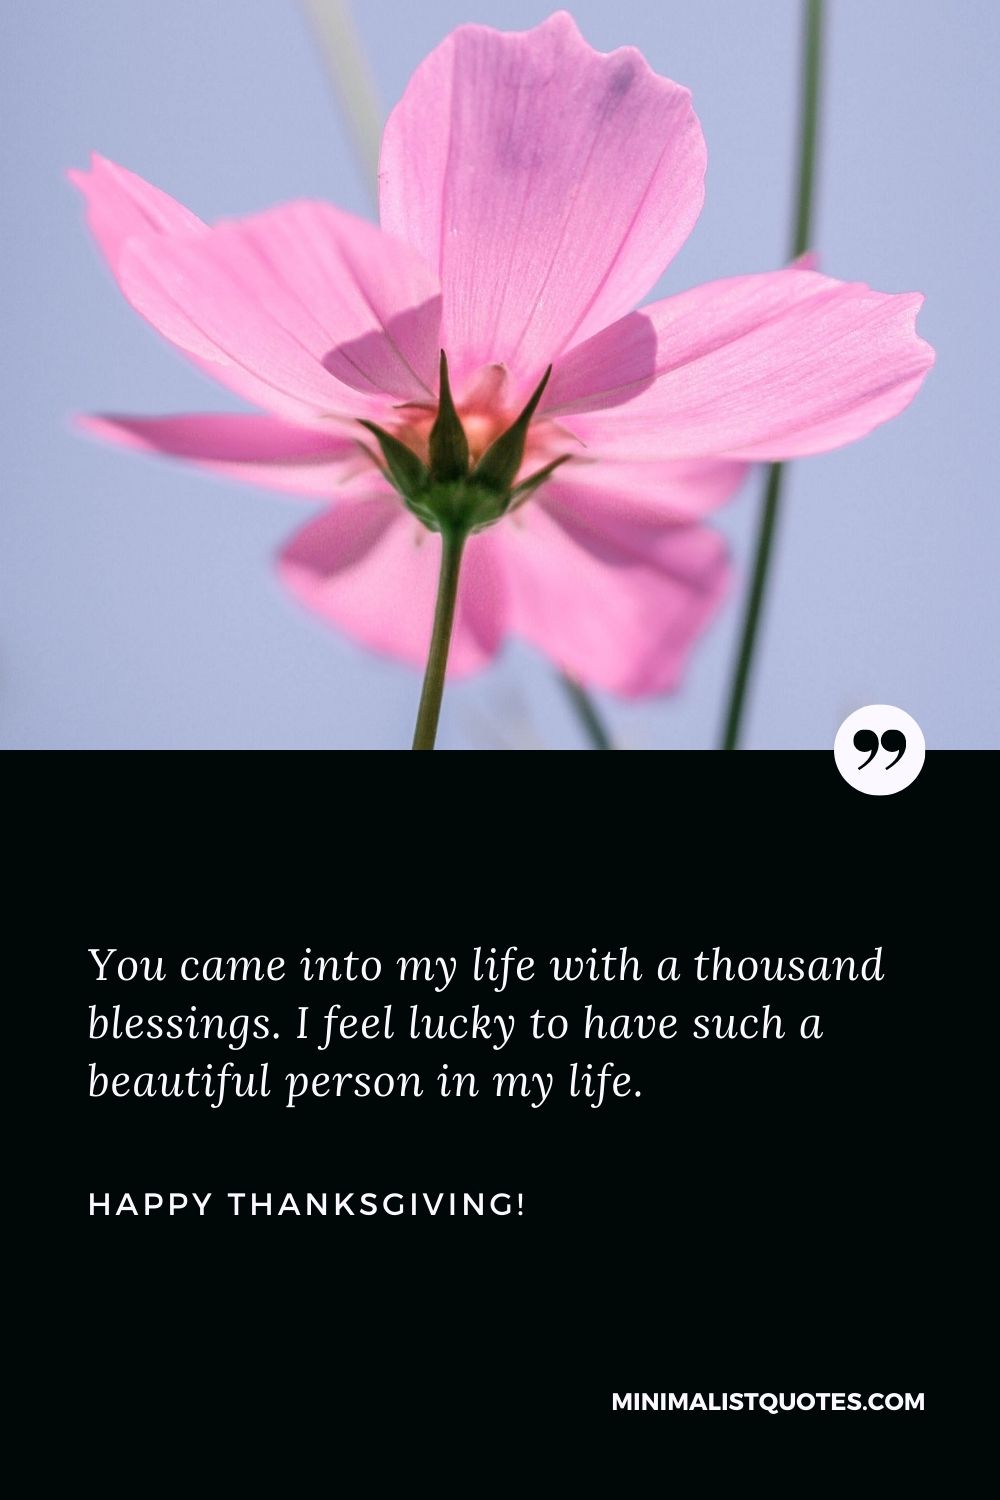 Happy Thanksgiving greetings: You came into my life with a thousand blessings. I feel lucky to have such a beautiful person in my life. Happy Thanksgiving!